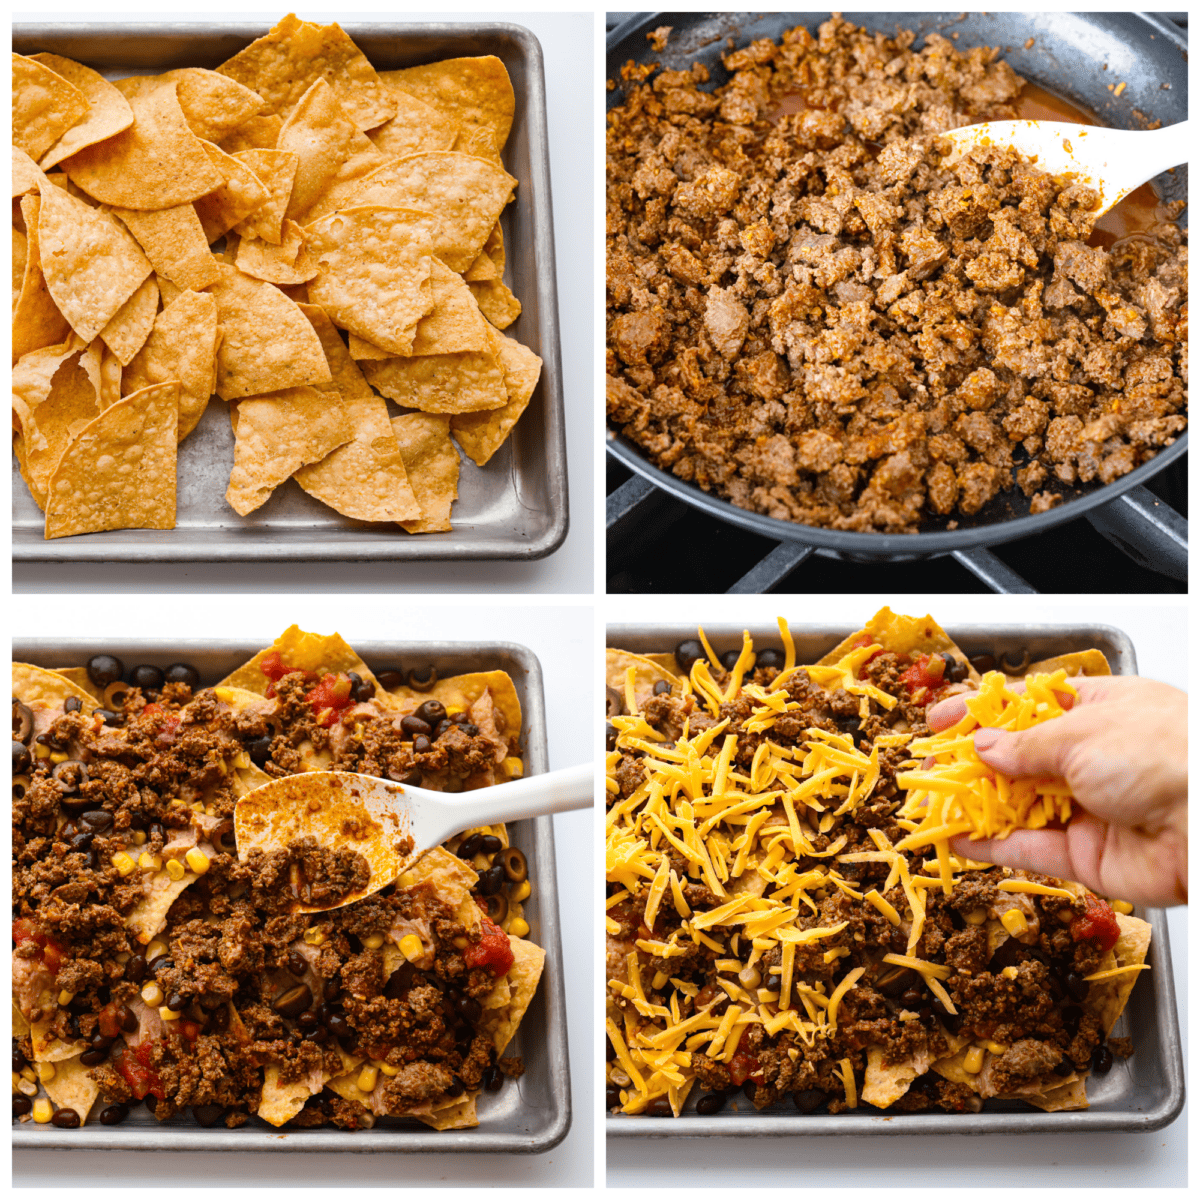 4 pictures showing how to make and assemble sheet pan nachos. 